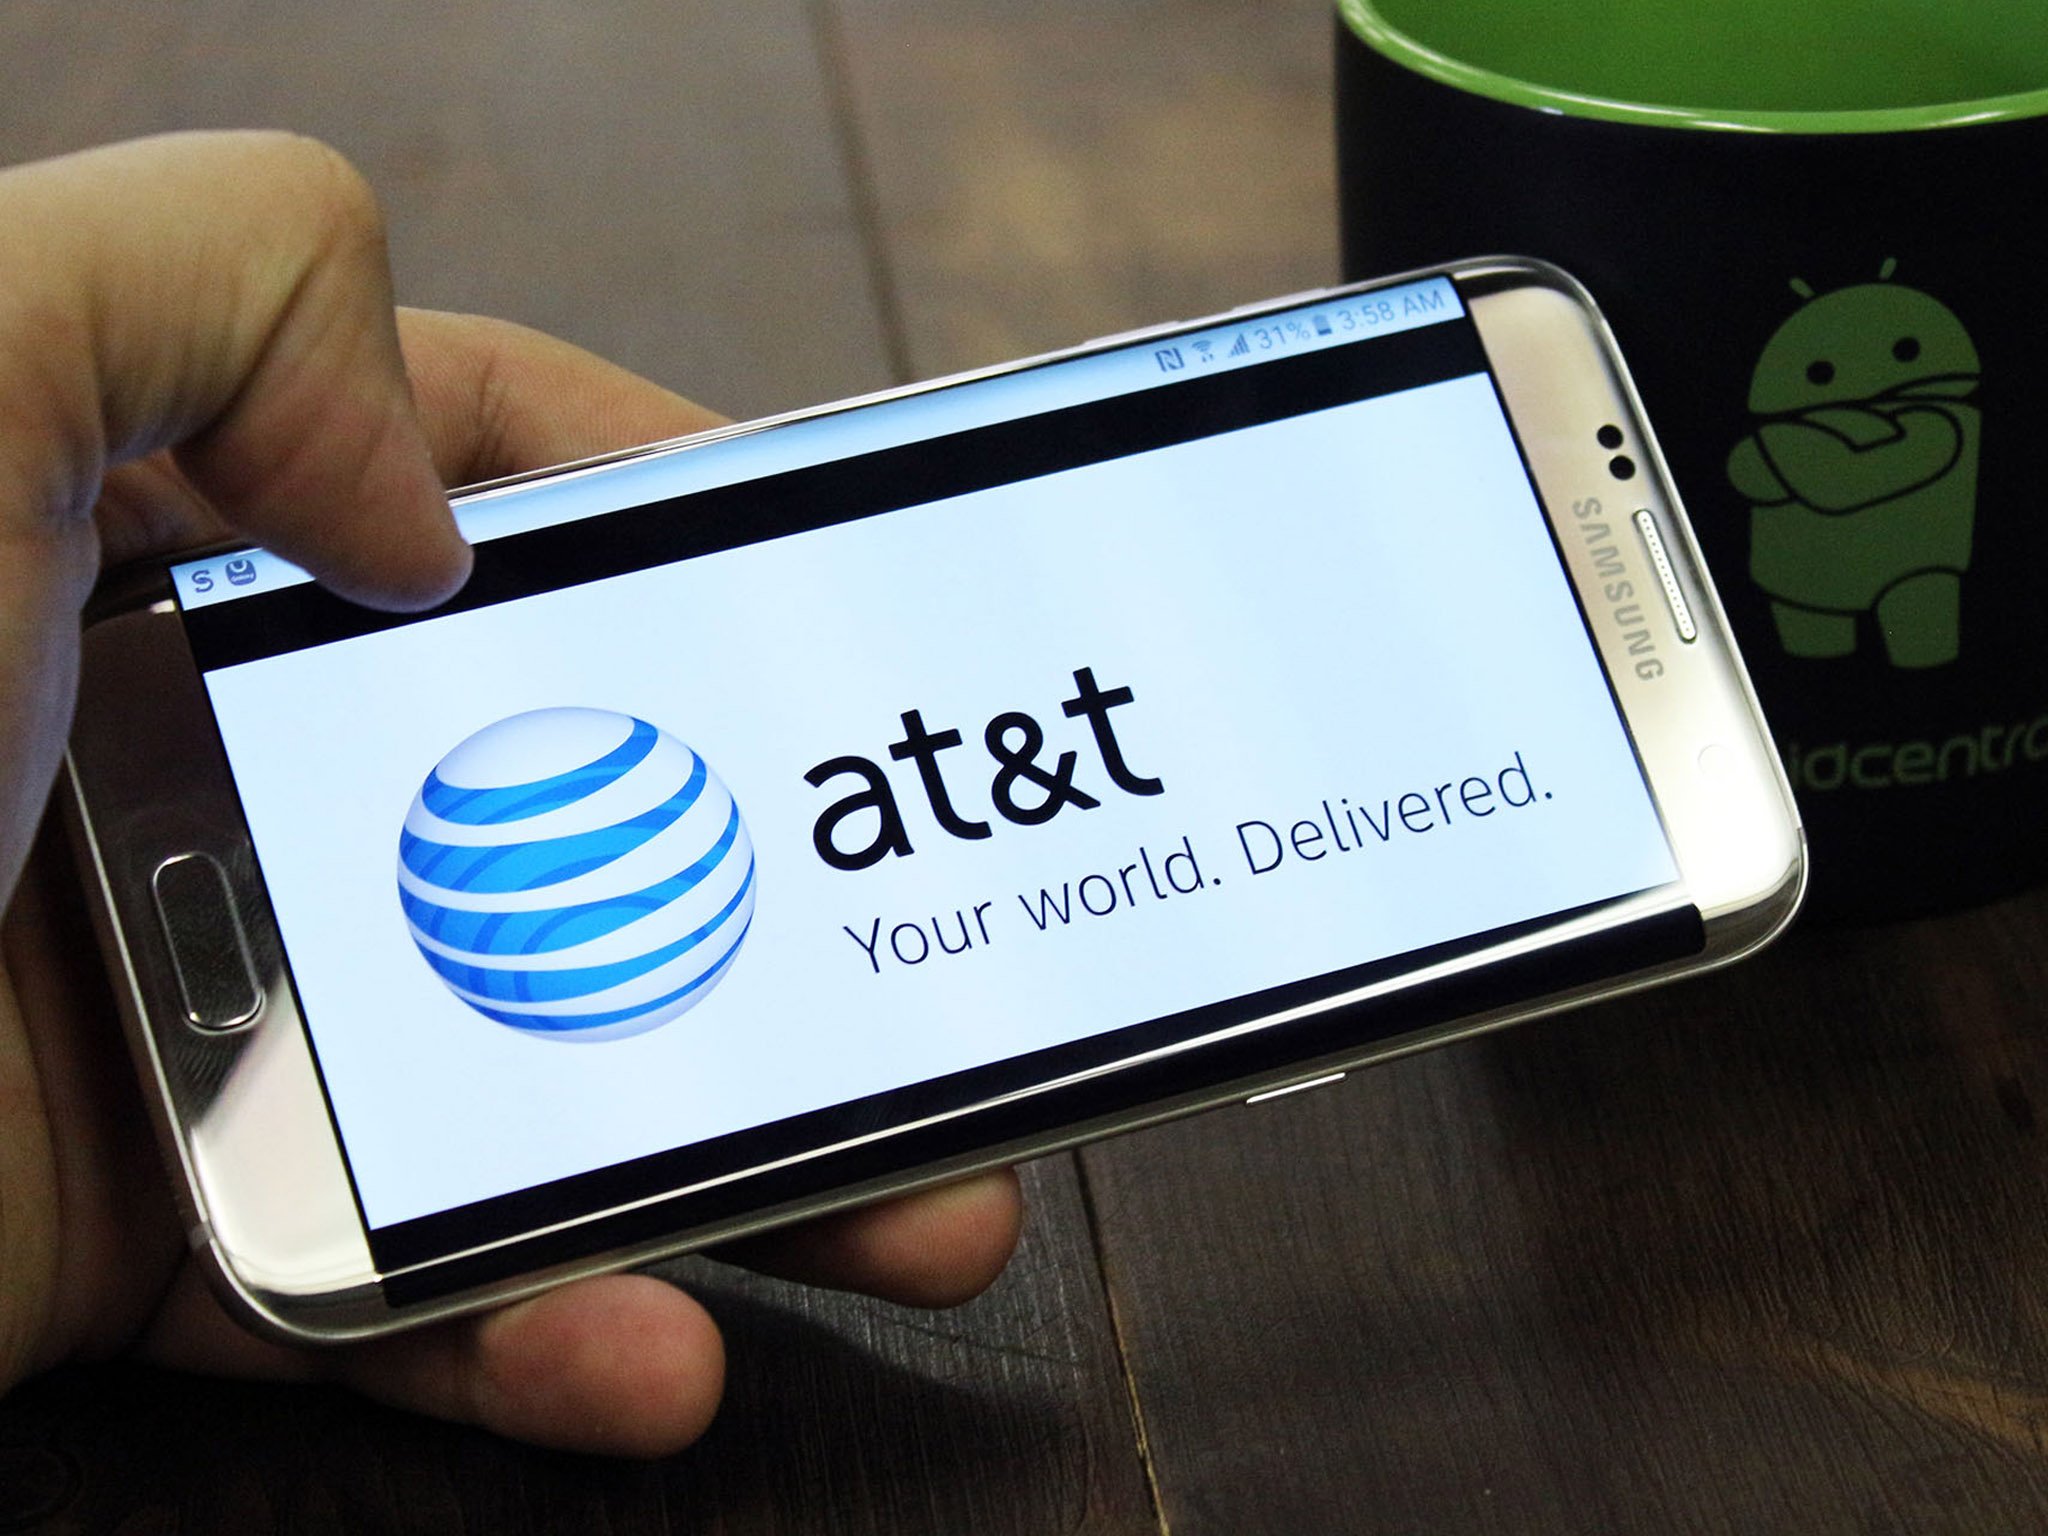 How do you activate your AT&T MicroCell?